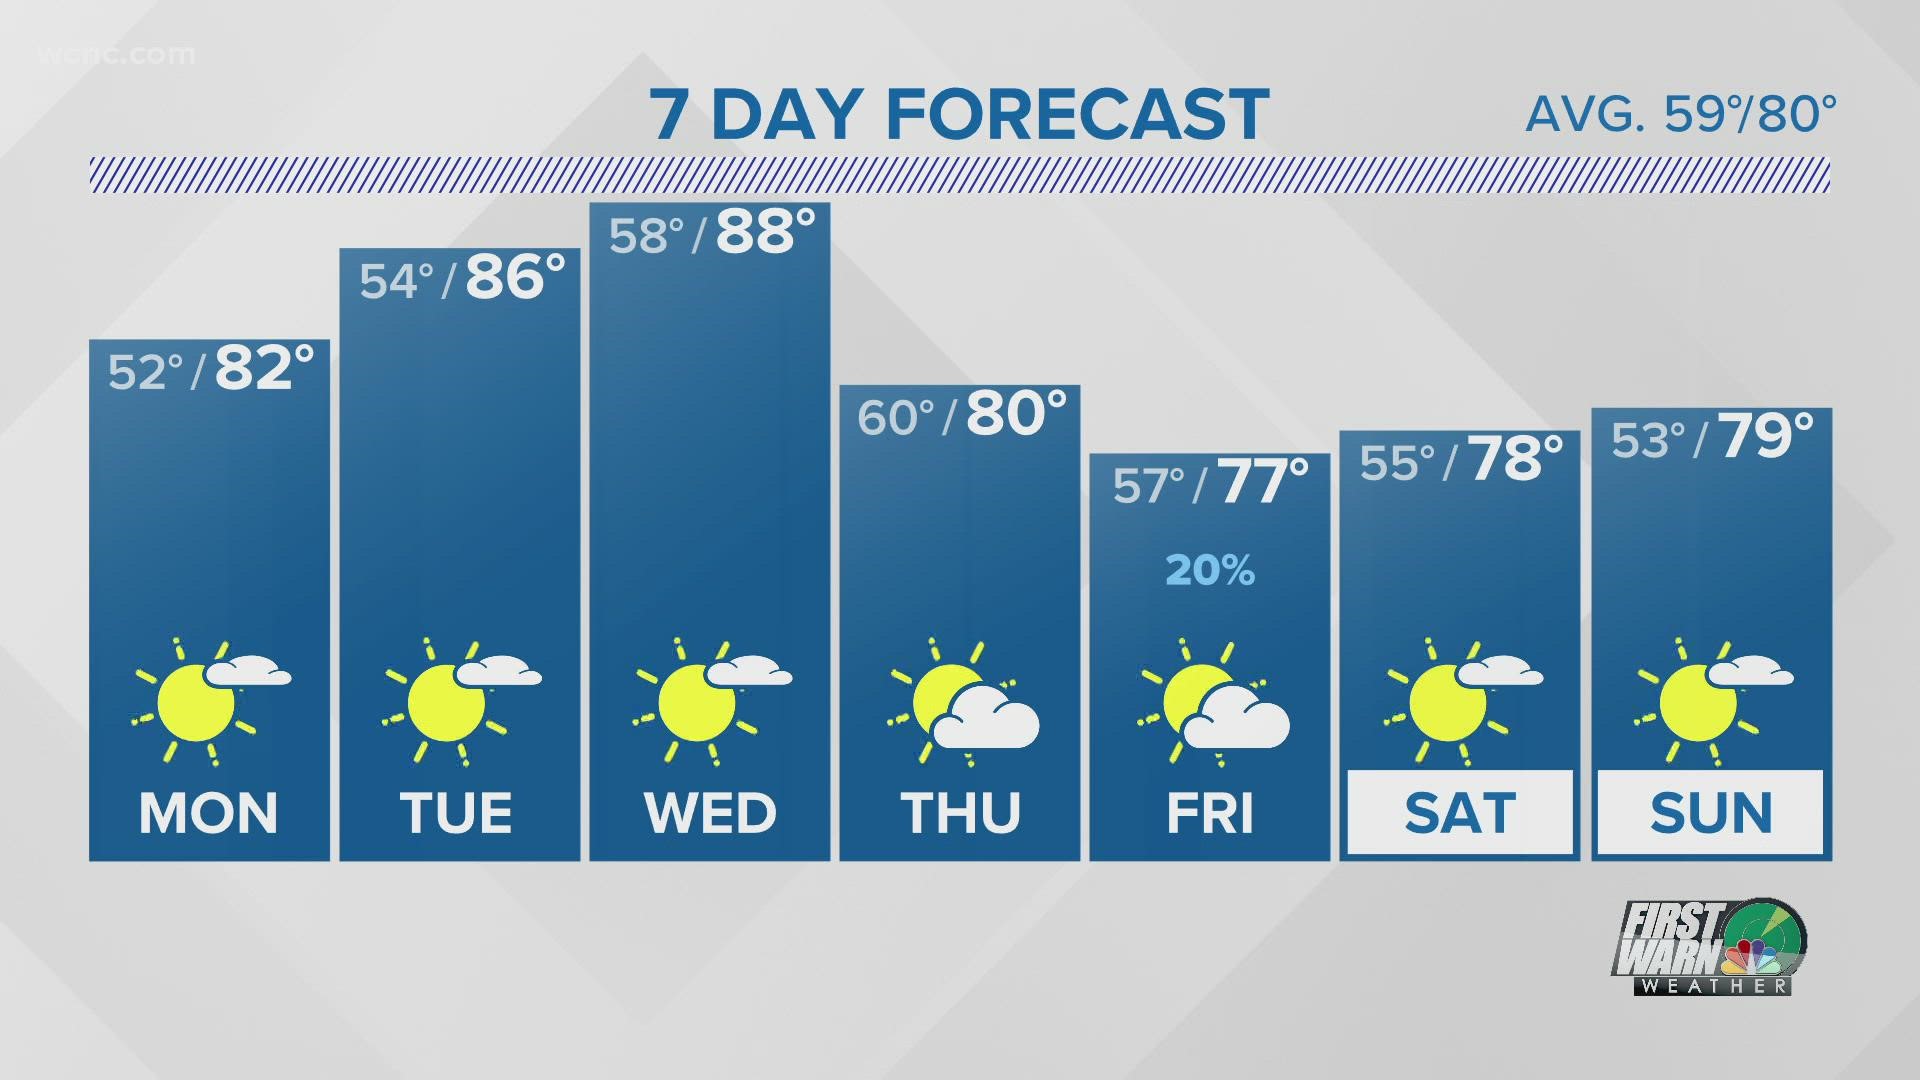 WCNC Charlotte's KJ Jacobs takes a look at the forecast for Sunday and for the work week.